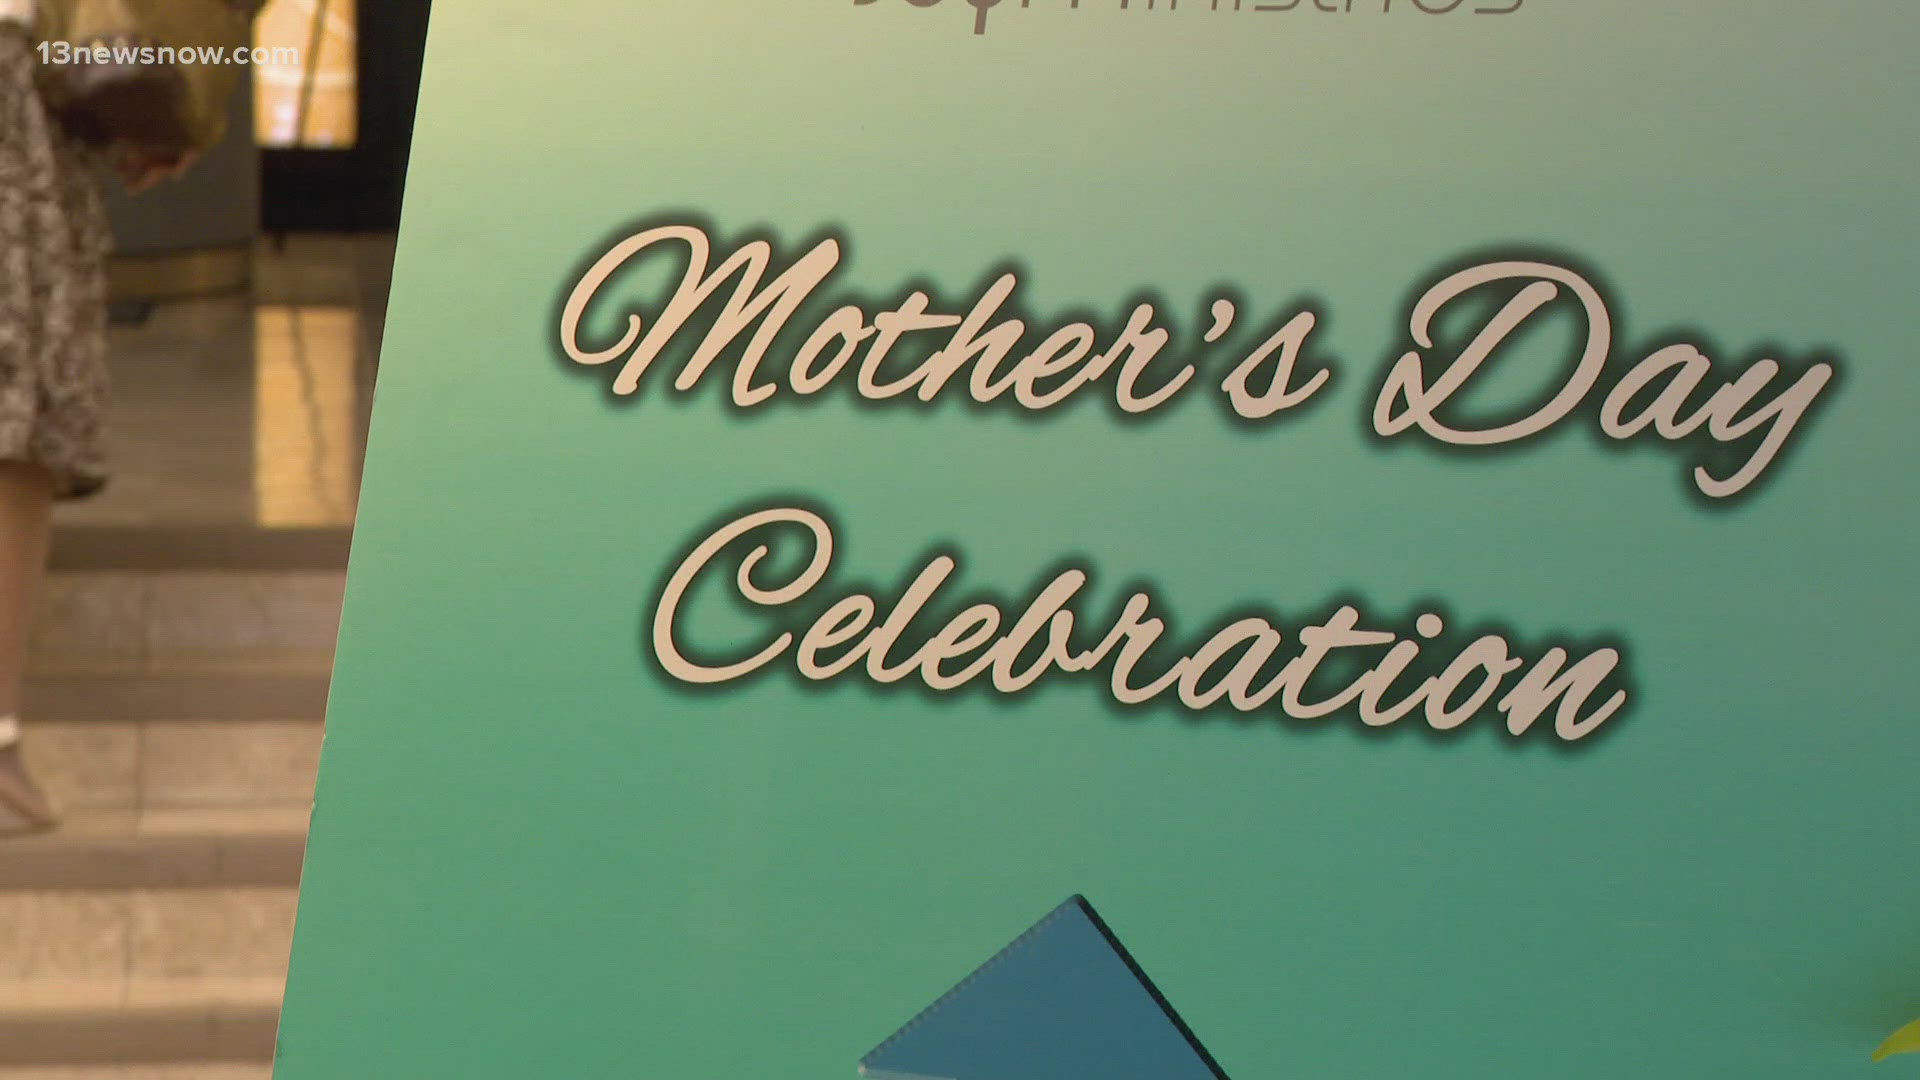 Single moms, military wives and widows were all honored and celebrated.